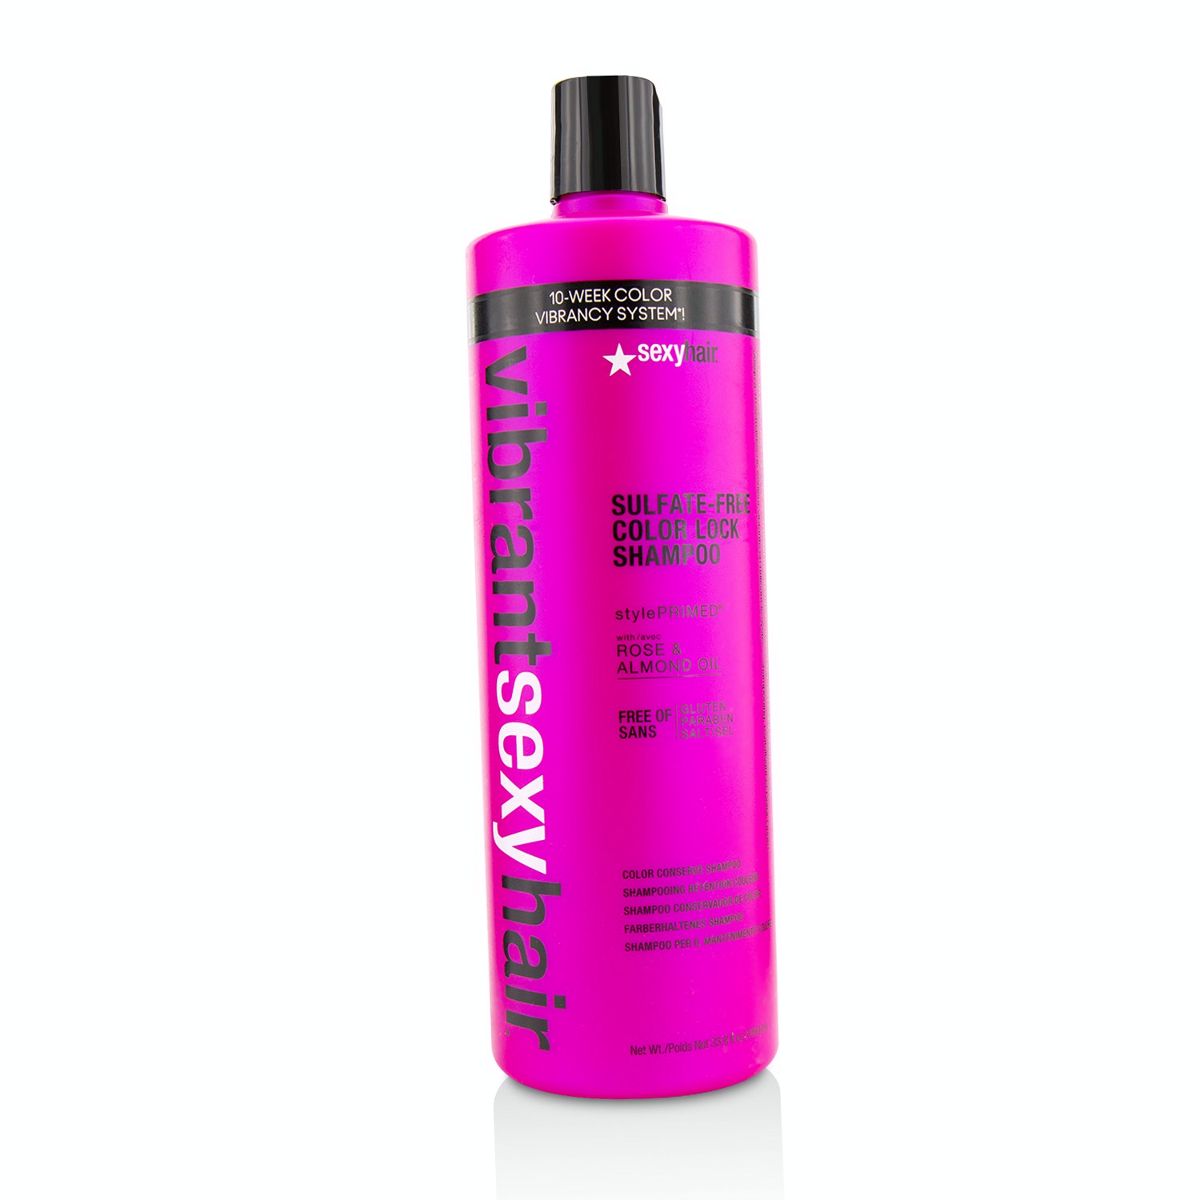 Vibrant Sexy Hair Color Lock Color Conserve Shampoo Sexy Hair Concepts Image